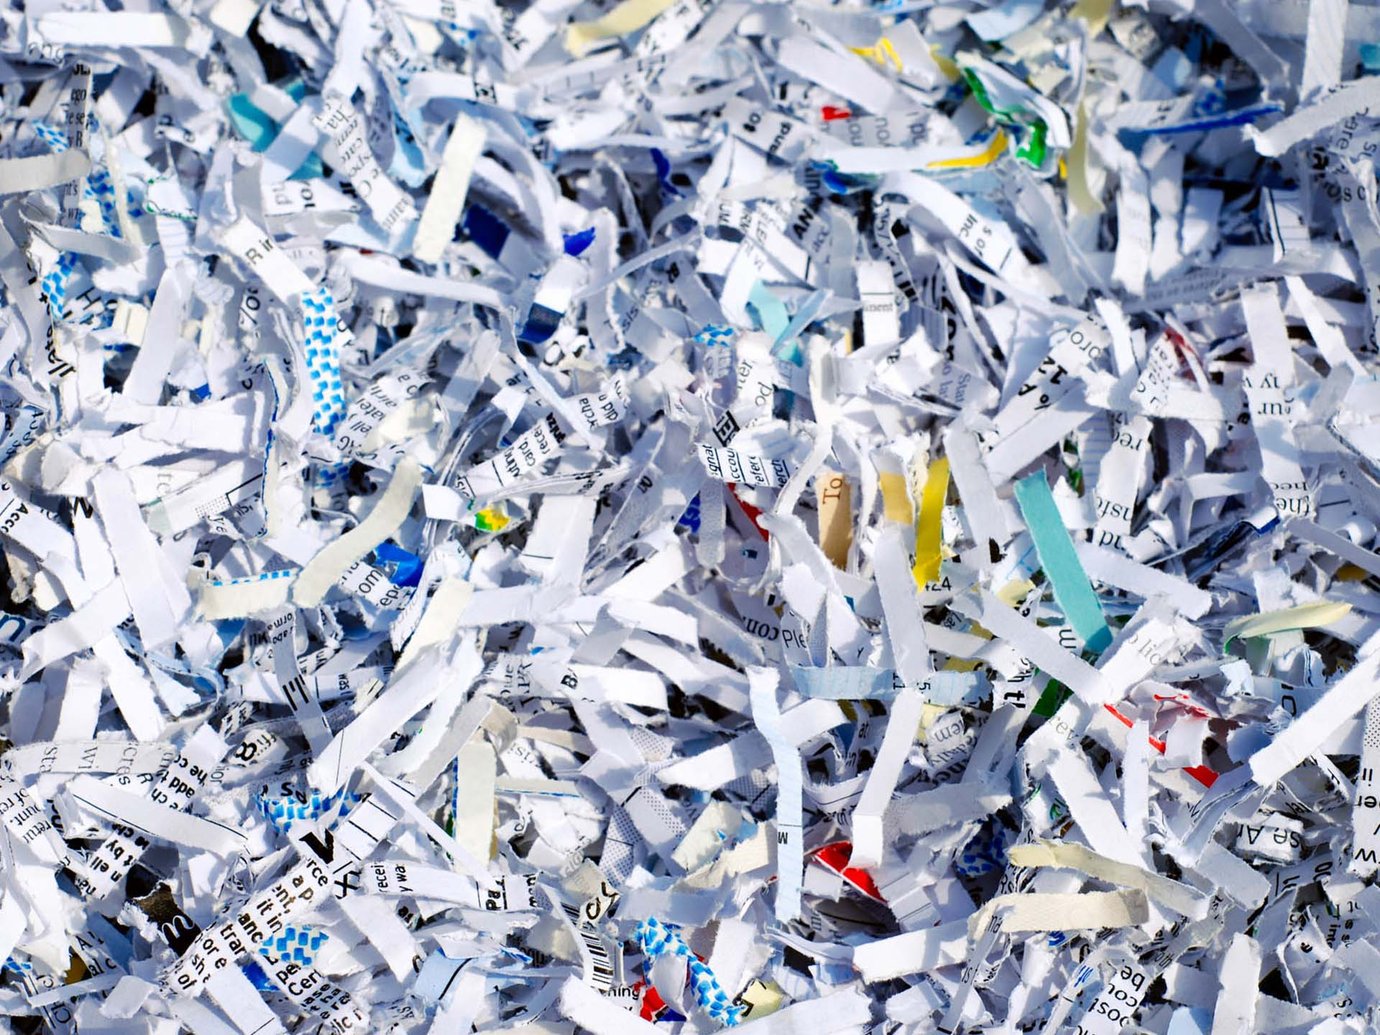 Paper Recycling Services for Businesses